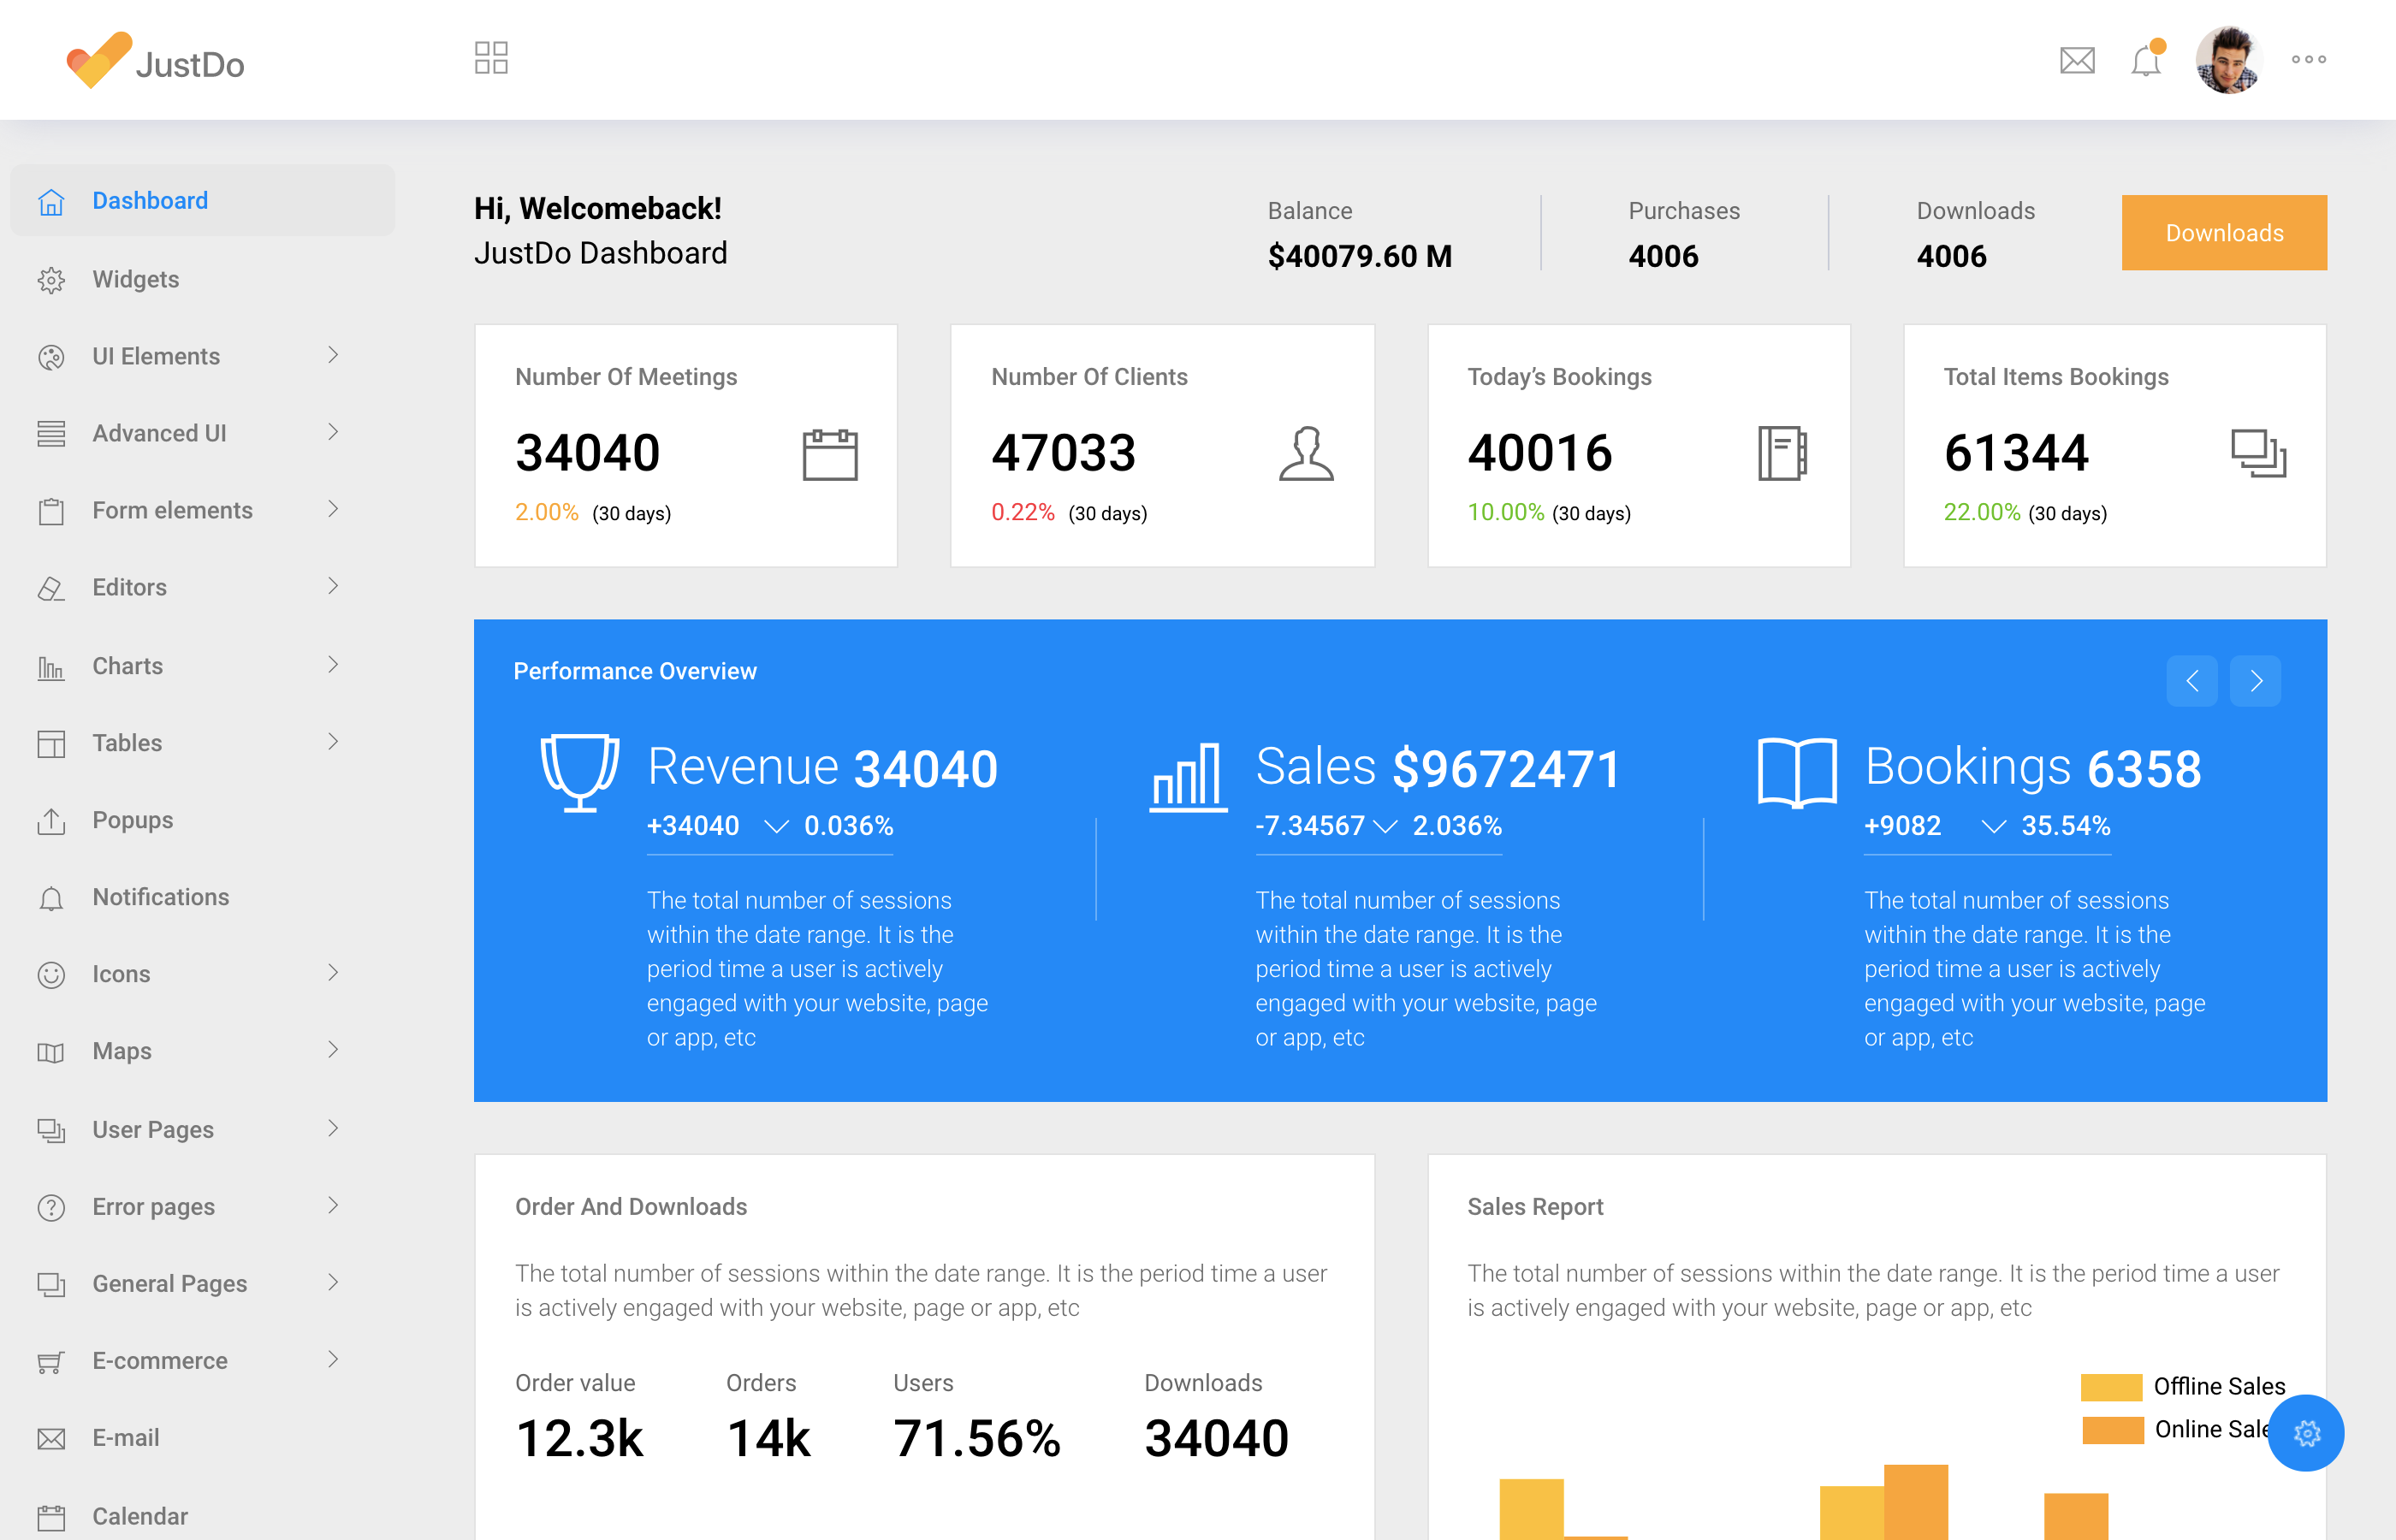 justdo angular is the best Bootstrap Angular admin template